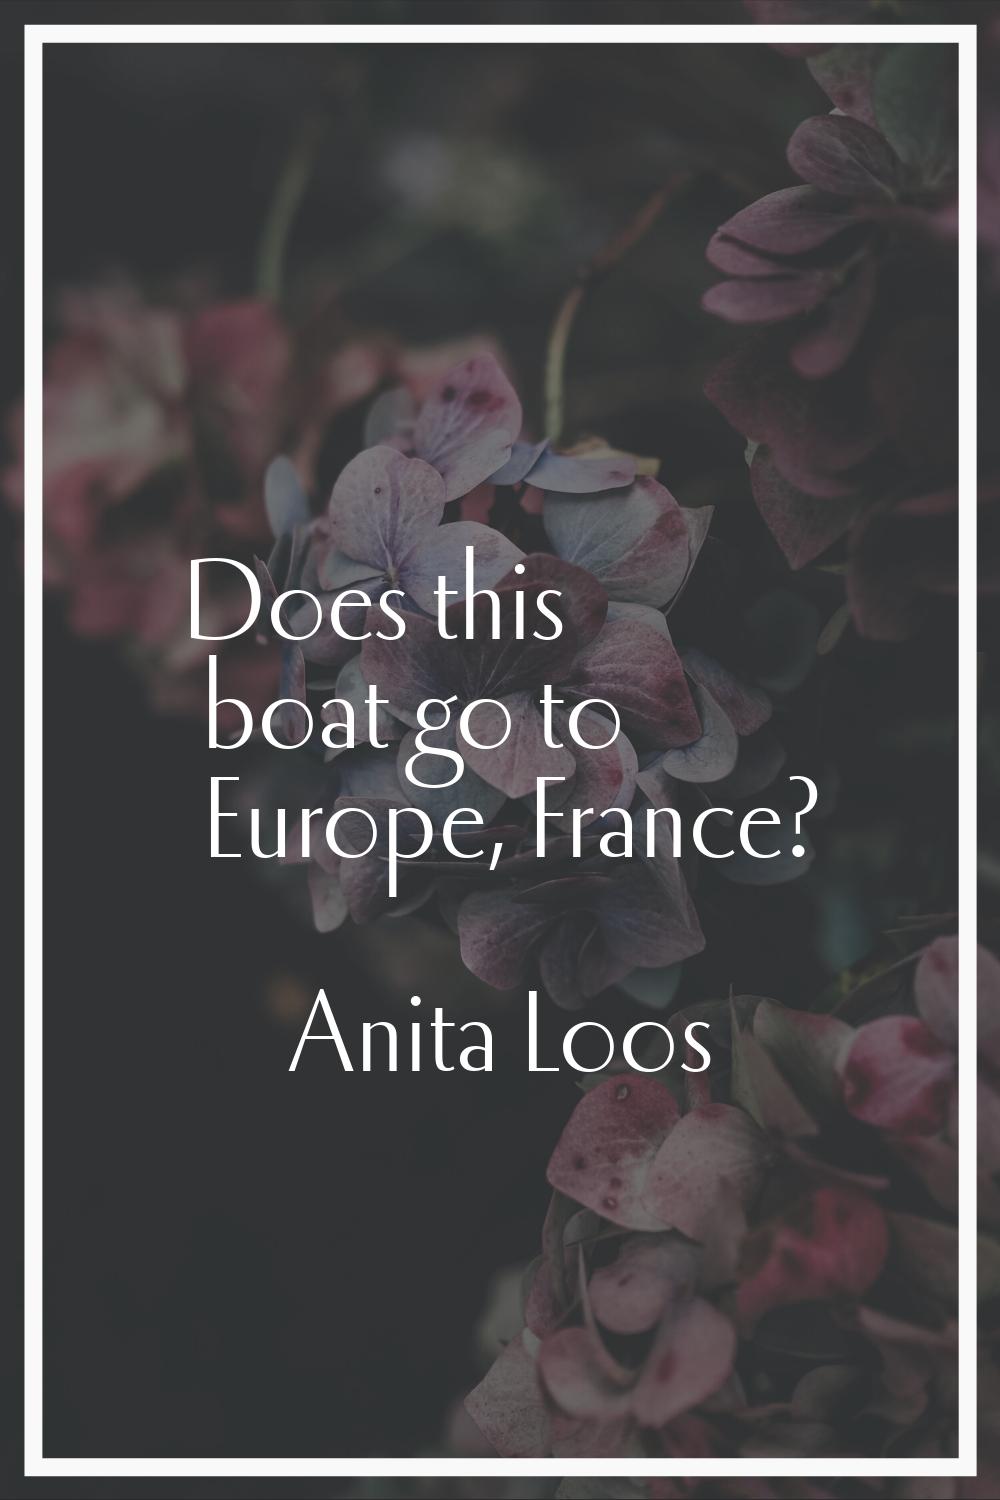 Does this boat go to Europe, France?